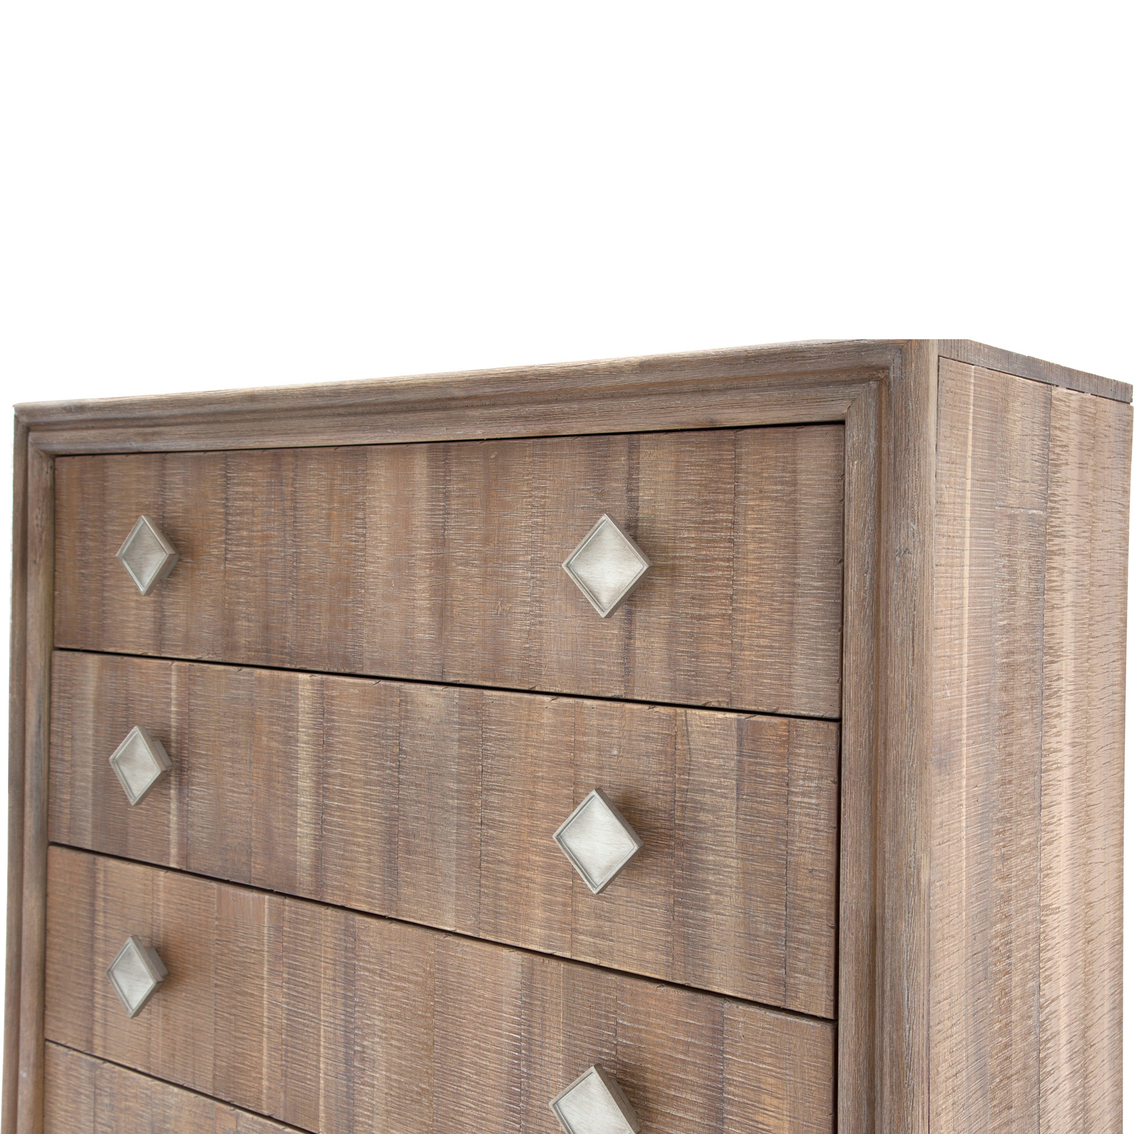 Kathy Ireland Home Hudson Ferry 6 Drawer Chest - Image 5 of 7